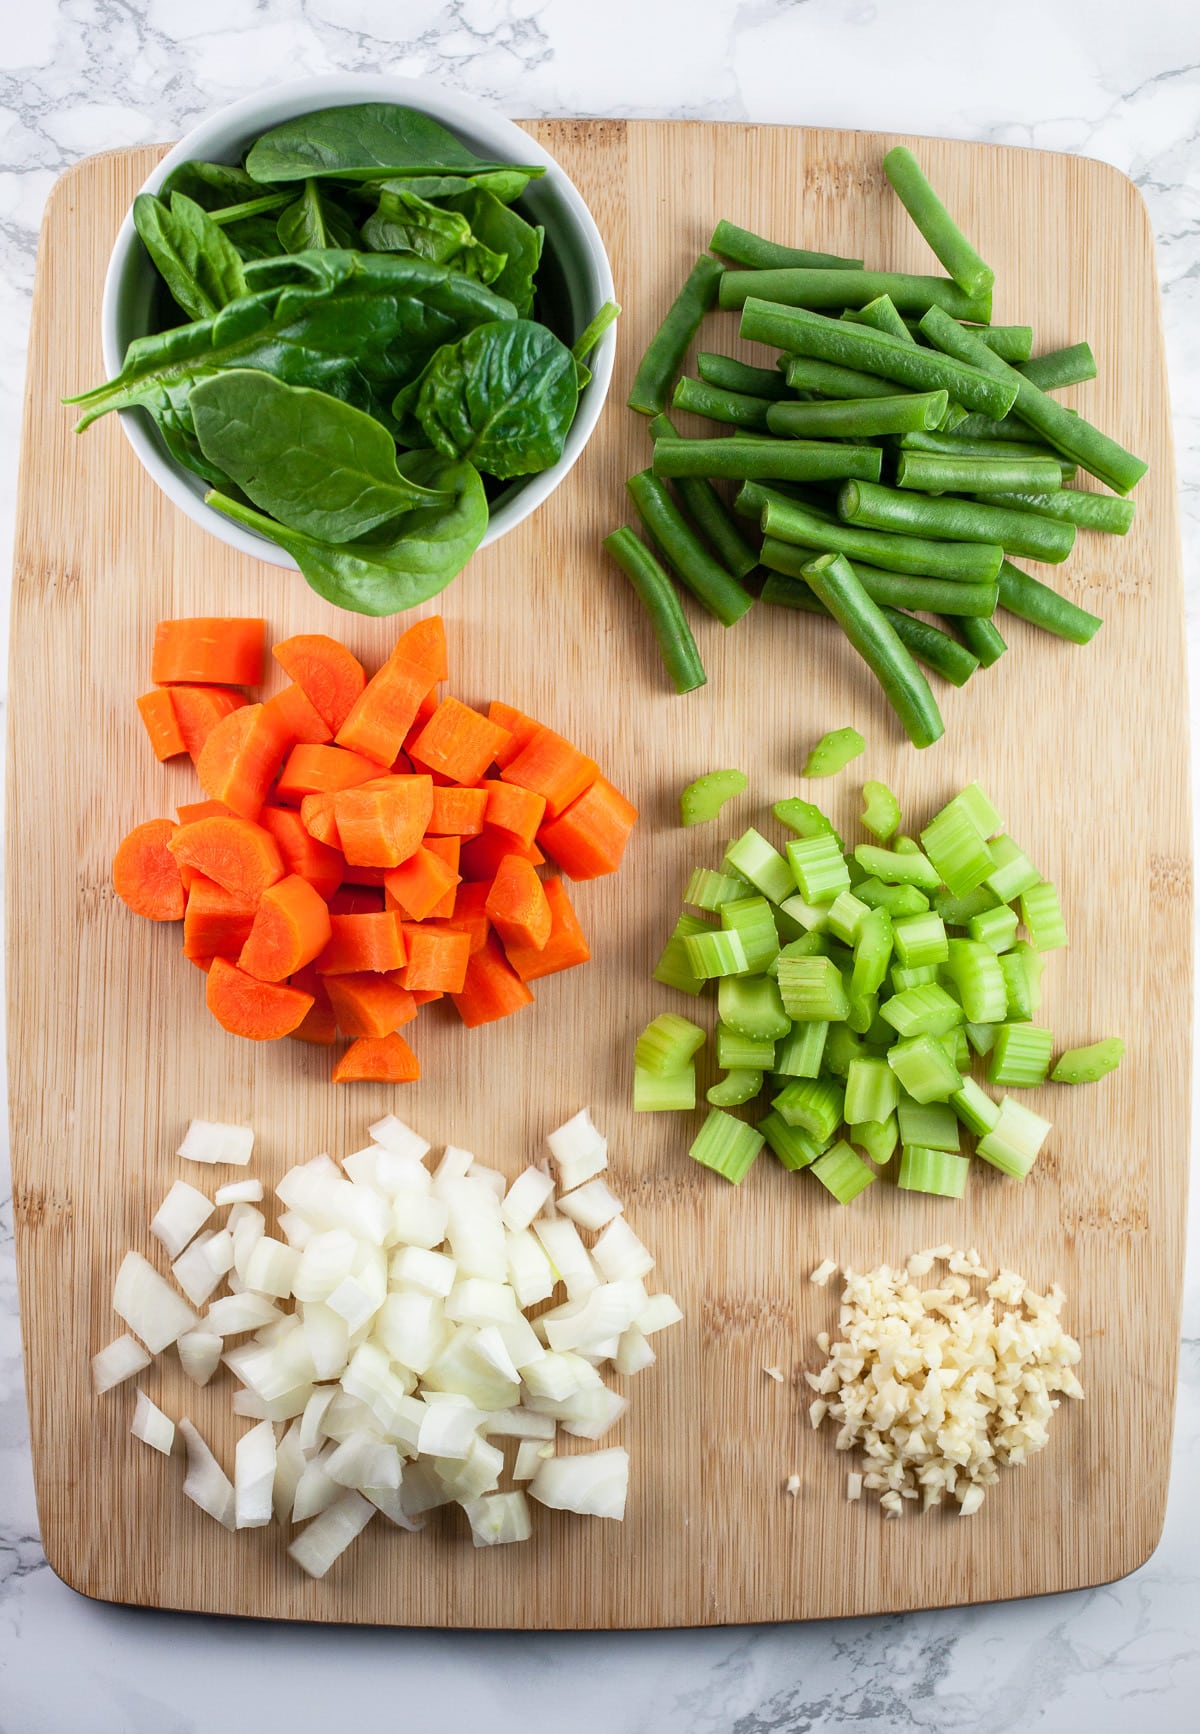 Minced garlic, onions, celery, carrots, green beans, and spinach on wooden cutting board.